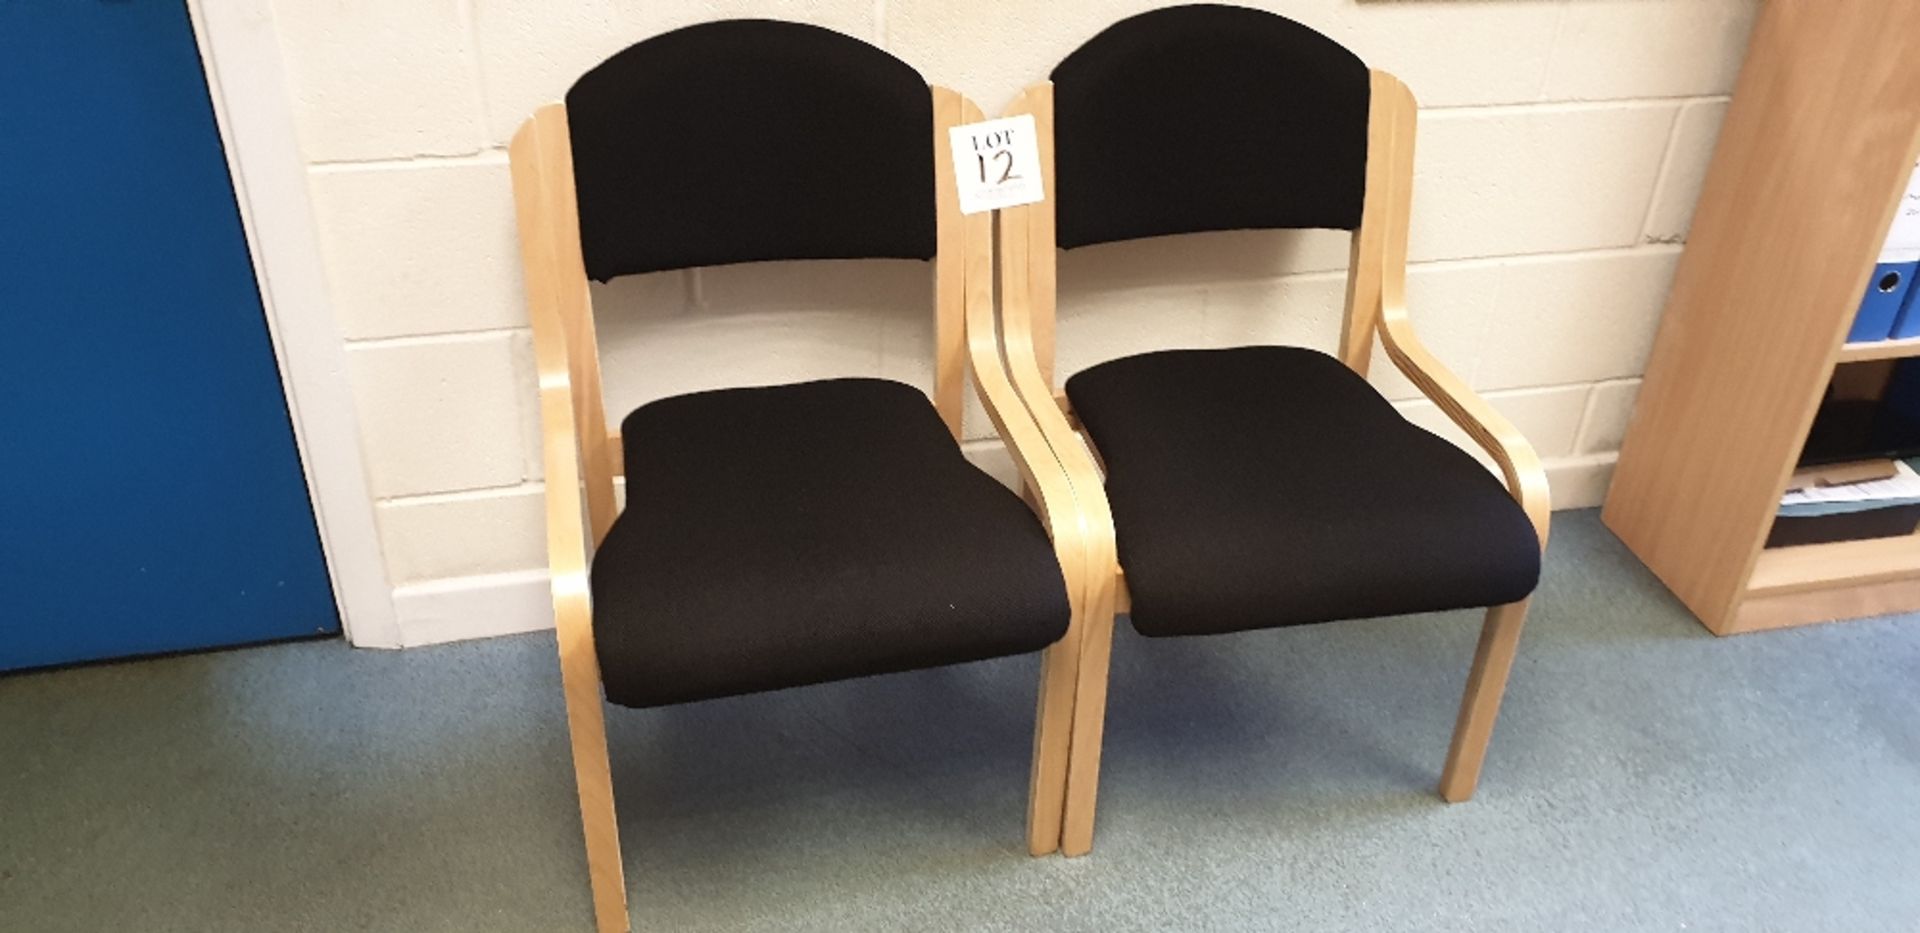 2 - wooden framed chairs